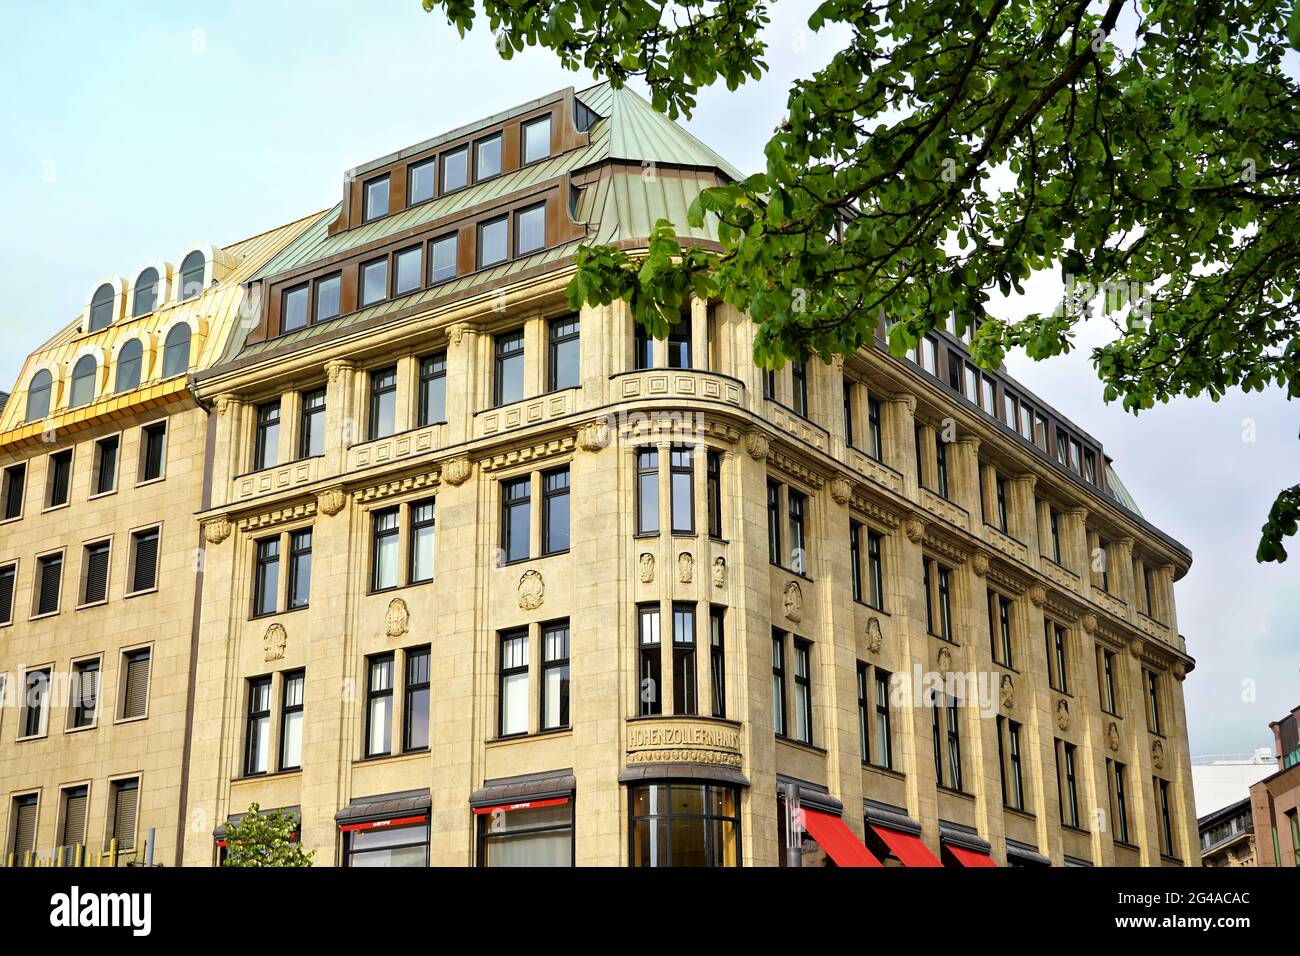 'Hohenzollernhaus' in downtown Düsseldorf, built 1909 - 1911 by the architect Hermann vom Endt. It has 6 floors and is under monument protection. Stock Photo